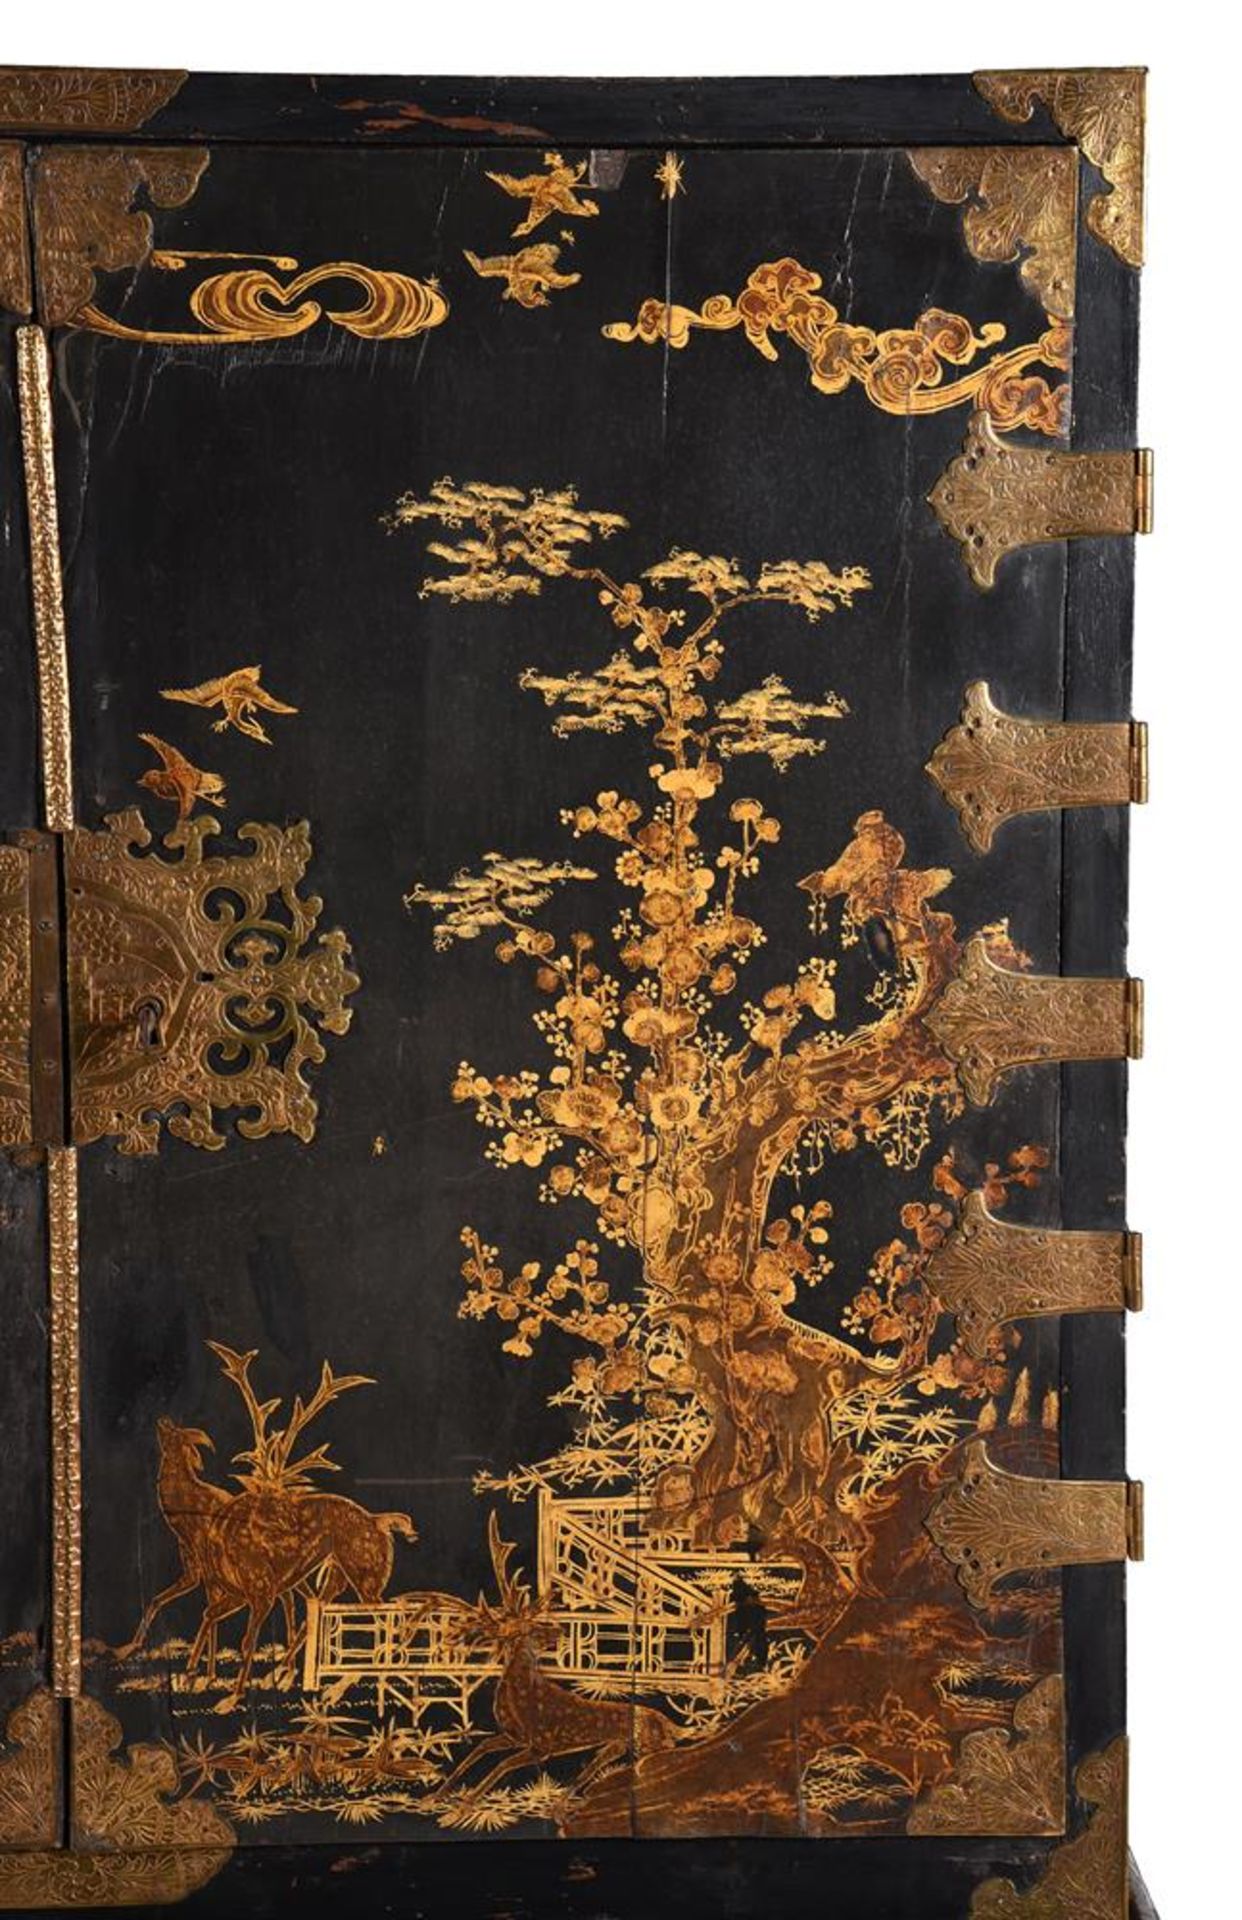 A WILLIAM & MARY BLACK LACQUER AND GILT JAPANNED CABINET ON STAND, THE CABINET LATE 17TH CENTURY - Image 6 of 17